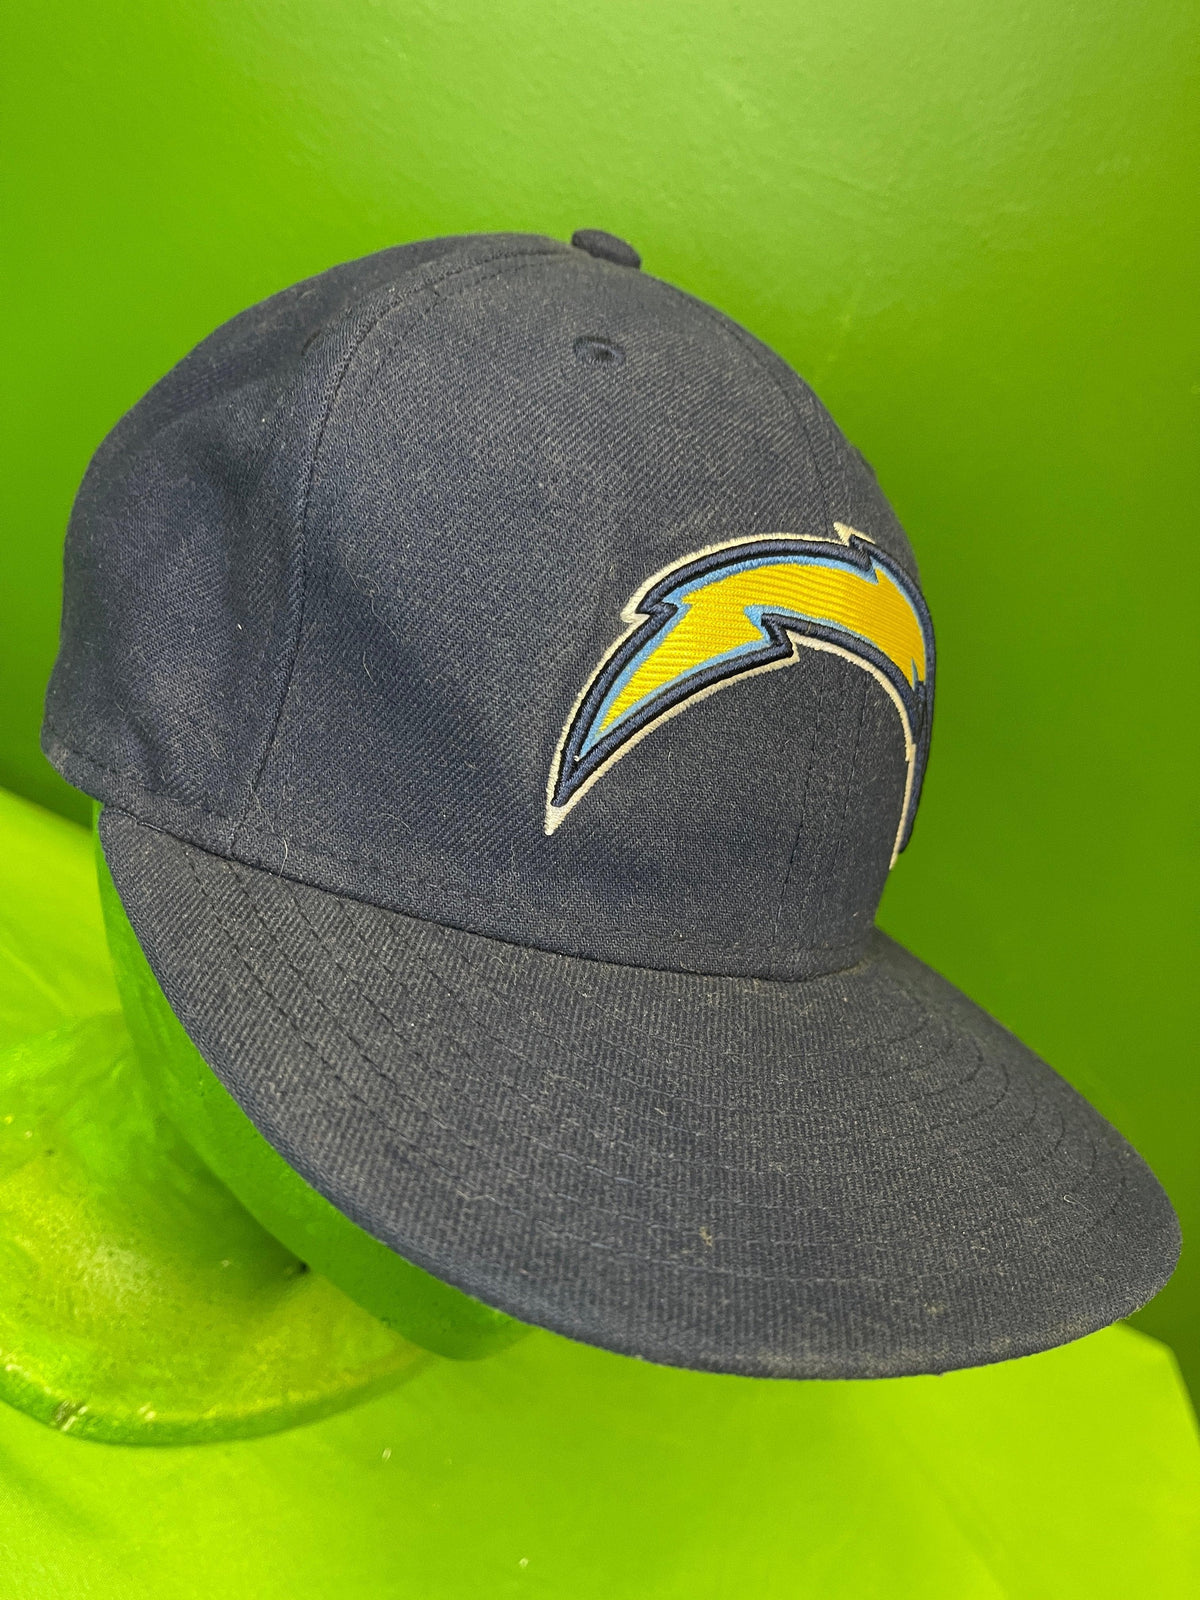 NFL Los Angeles Chargers New Era 59FIFTY Baseball Cap/Hat Size 7-1/4